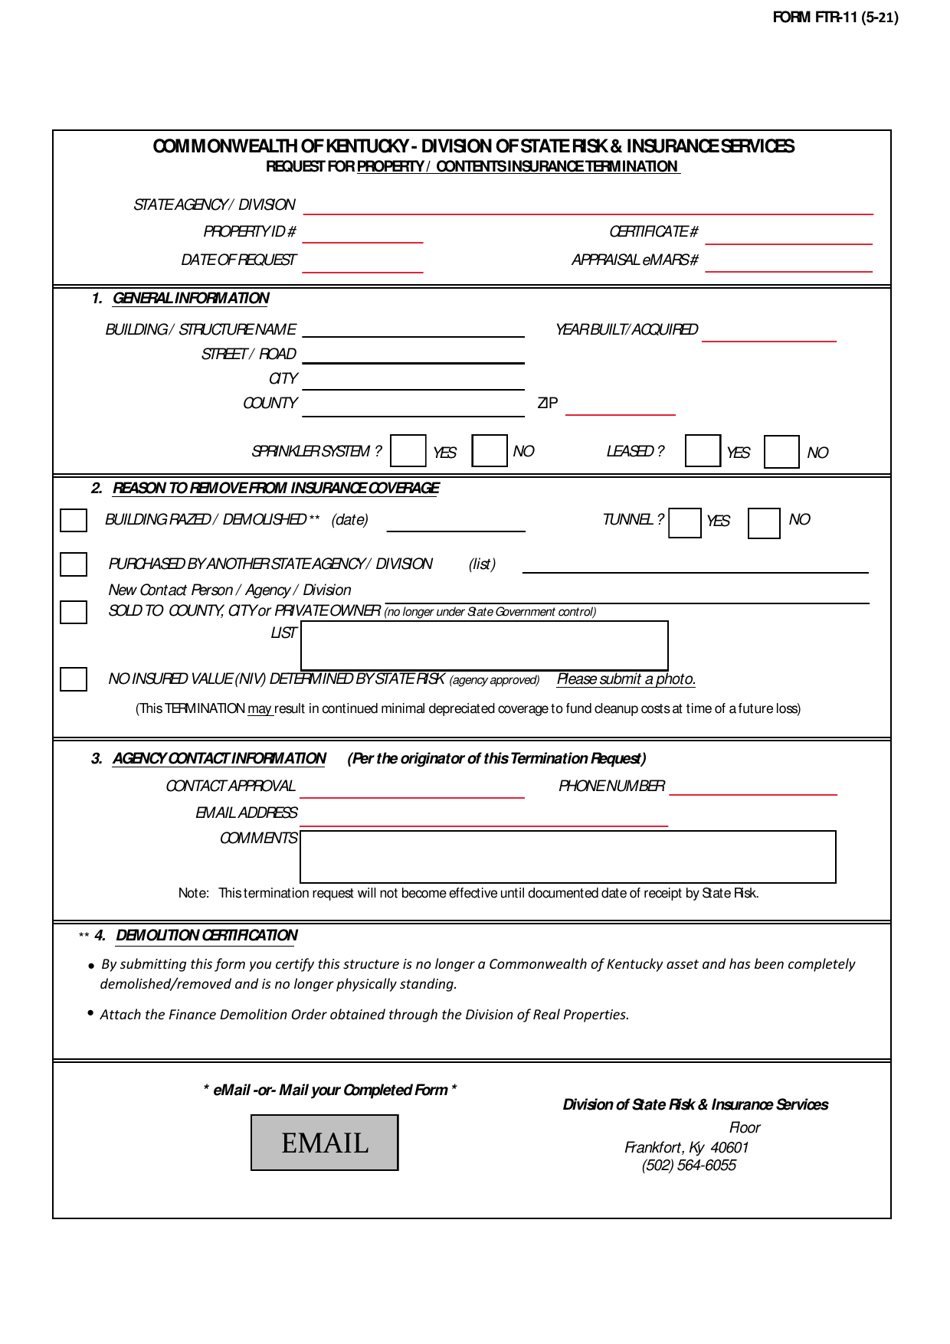 Form FTR-11 Request for Property / Contents Insurance Termination - Kentucky, Page 1